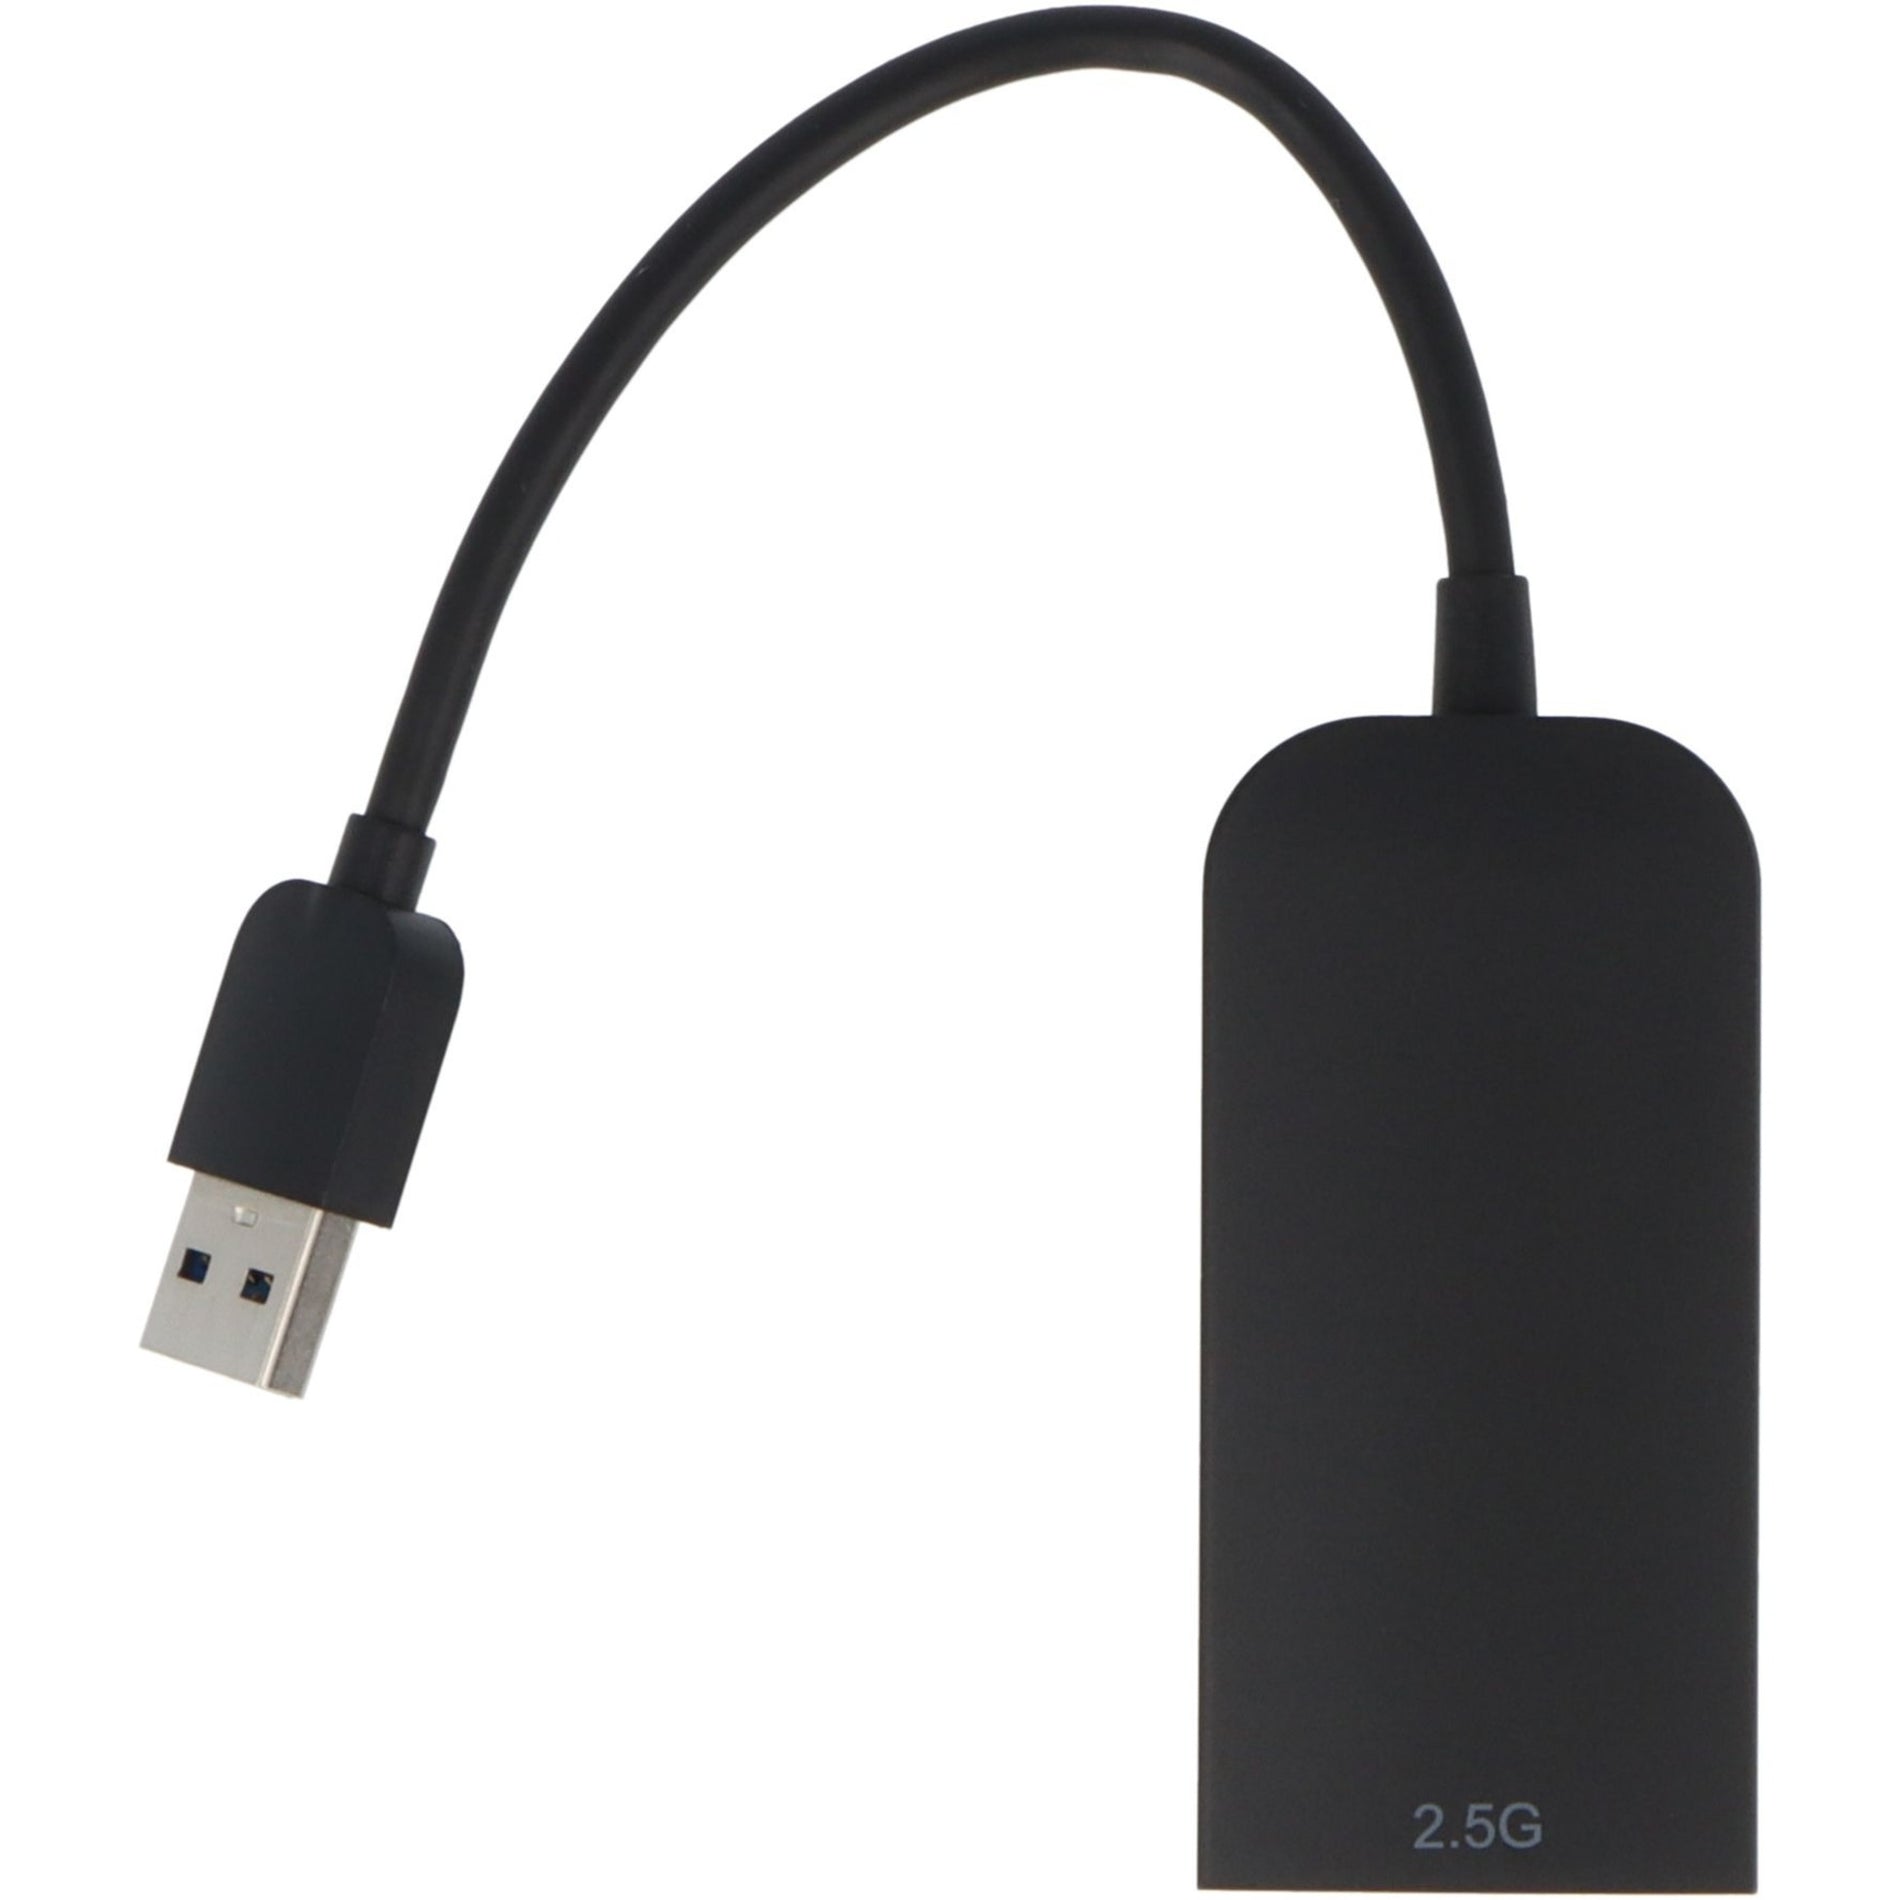 VisionTek 901436 USB-A 3.0 to 2.5Gb Ethernet Adapter, High-Speed Internet Connection for Your Device